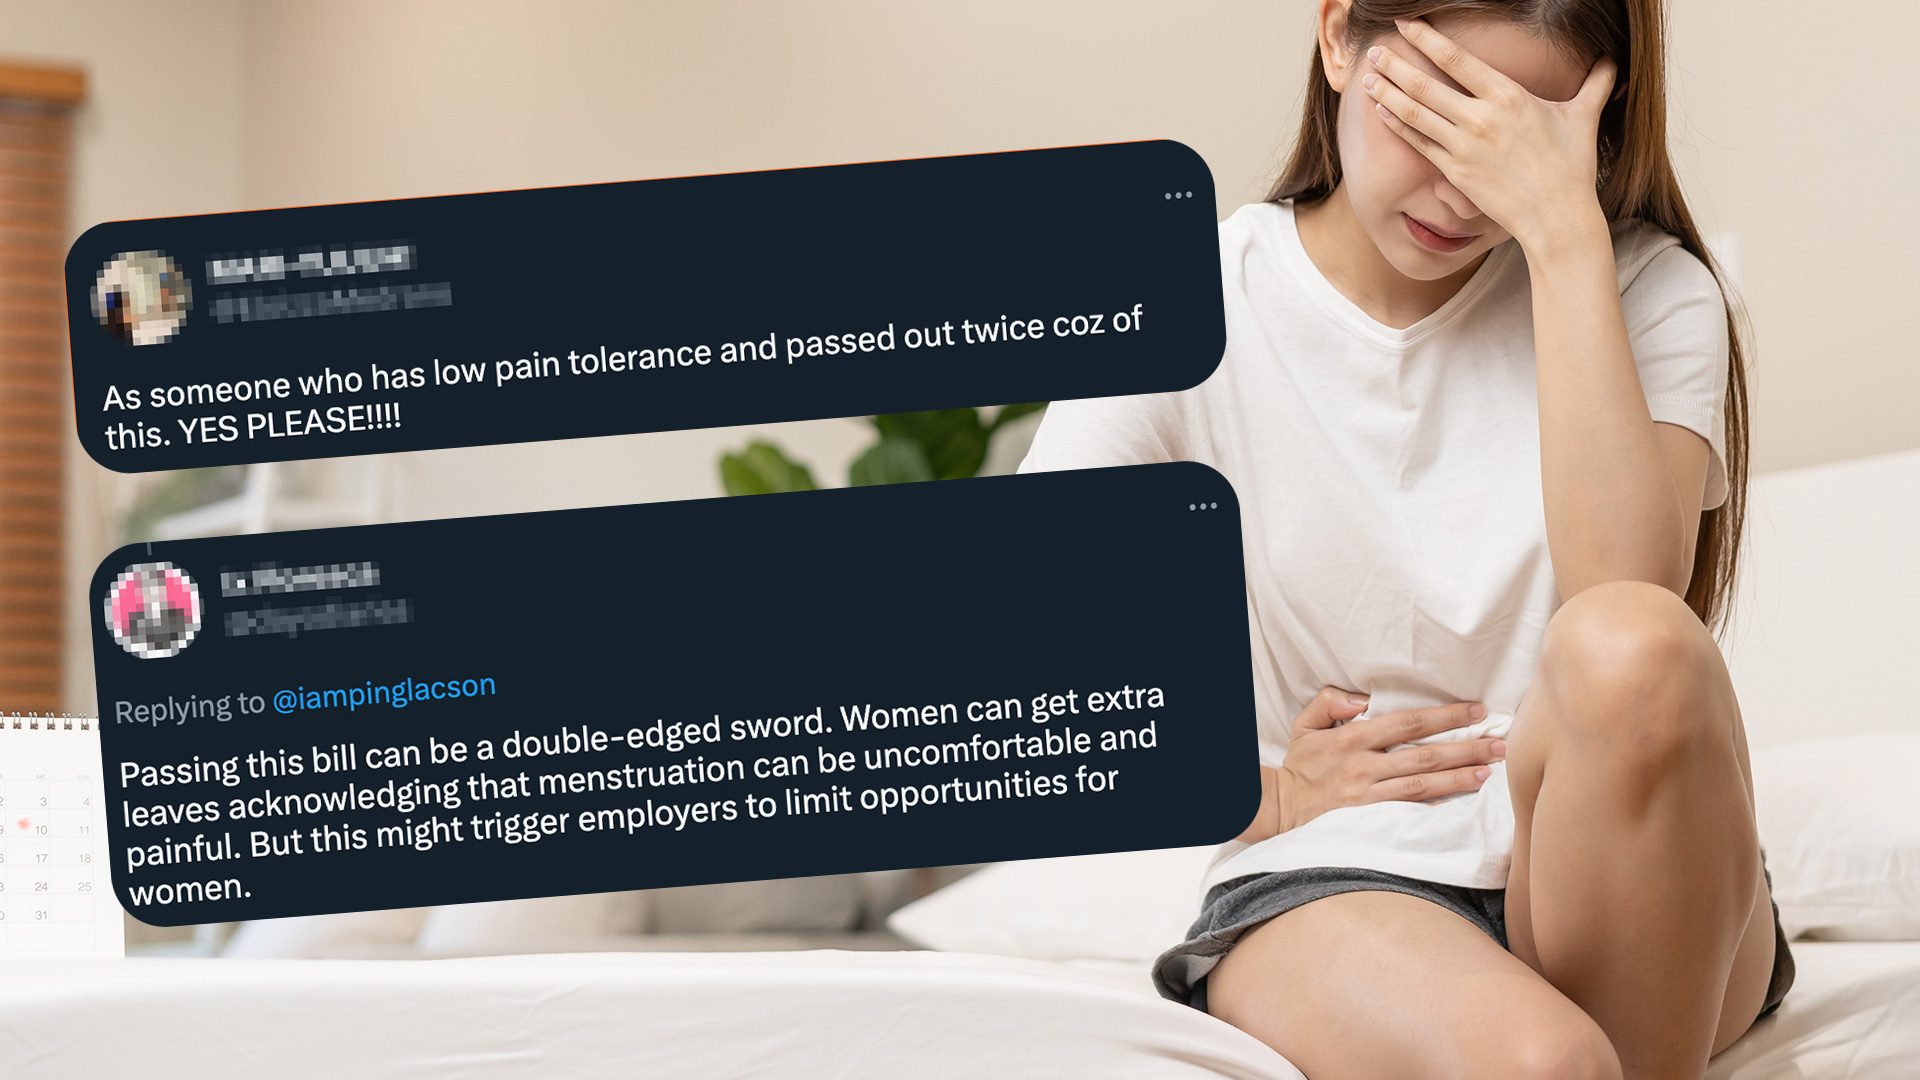 Proposed menstrual leave in PH draws mixed reactions online